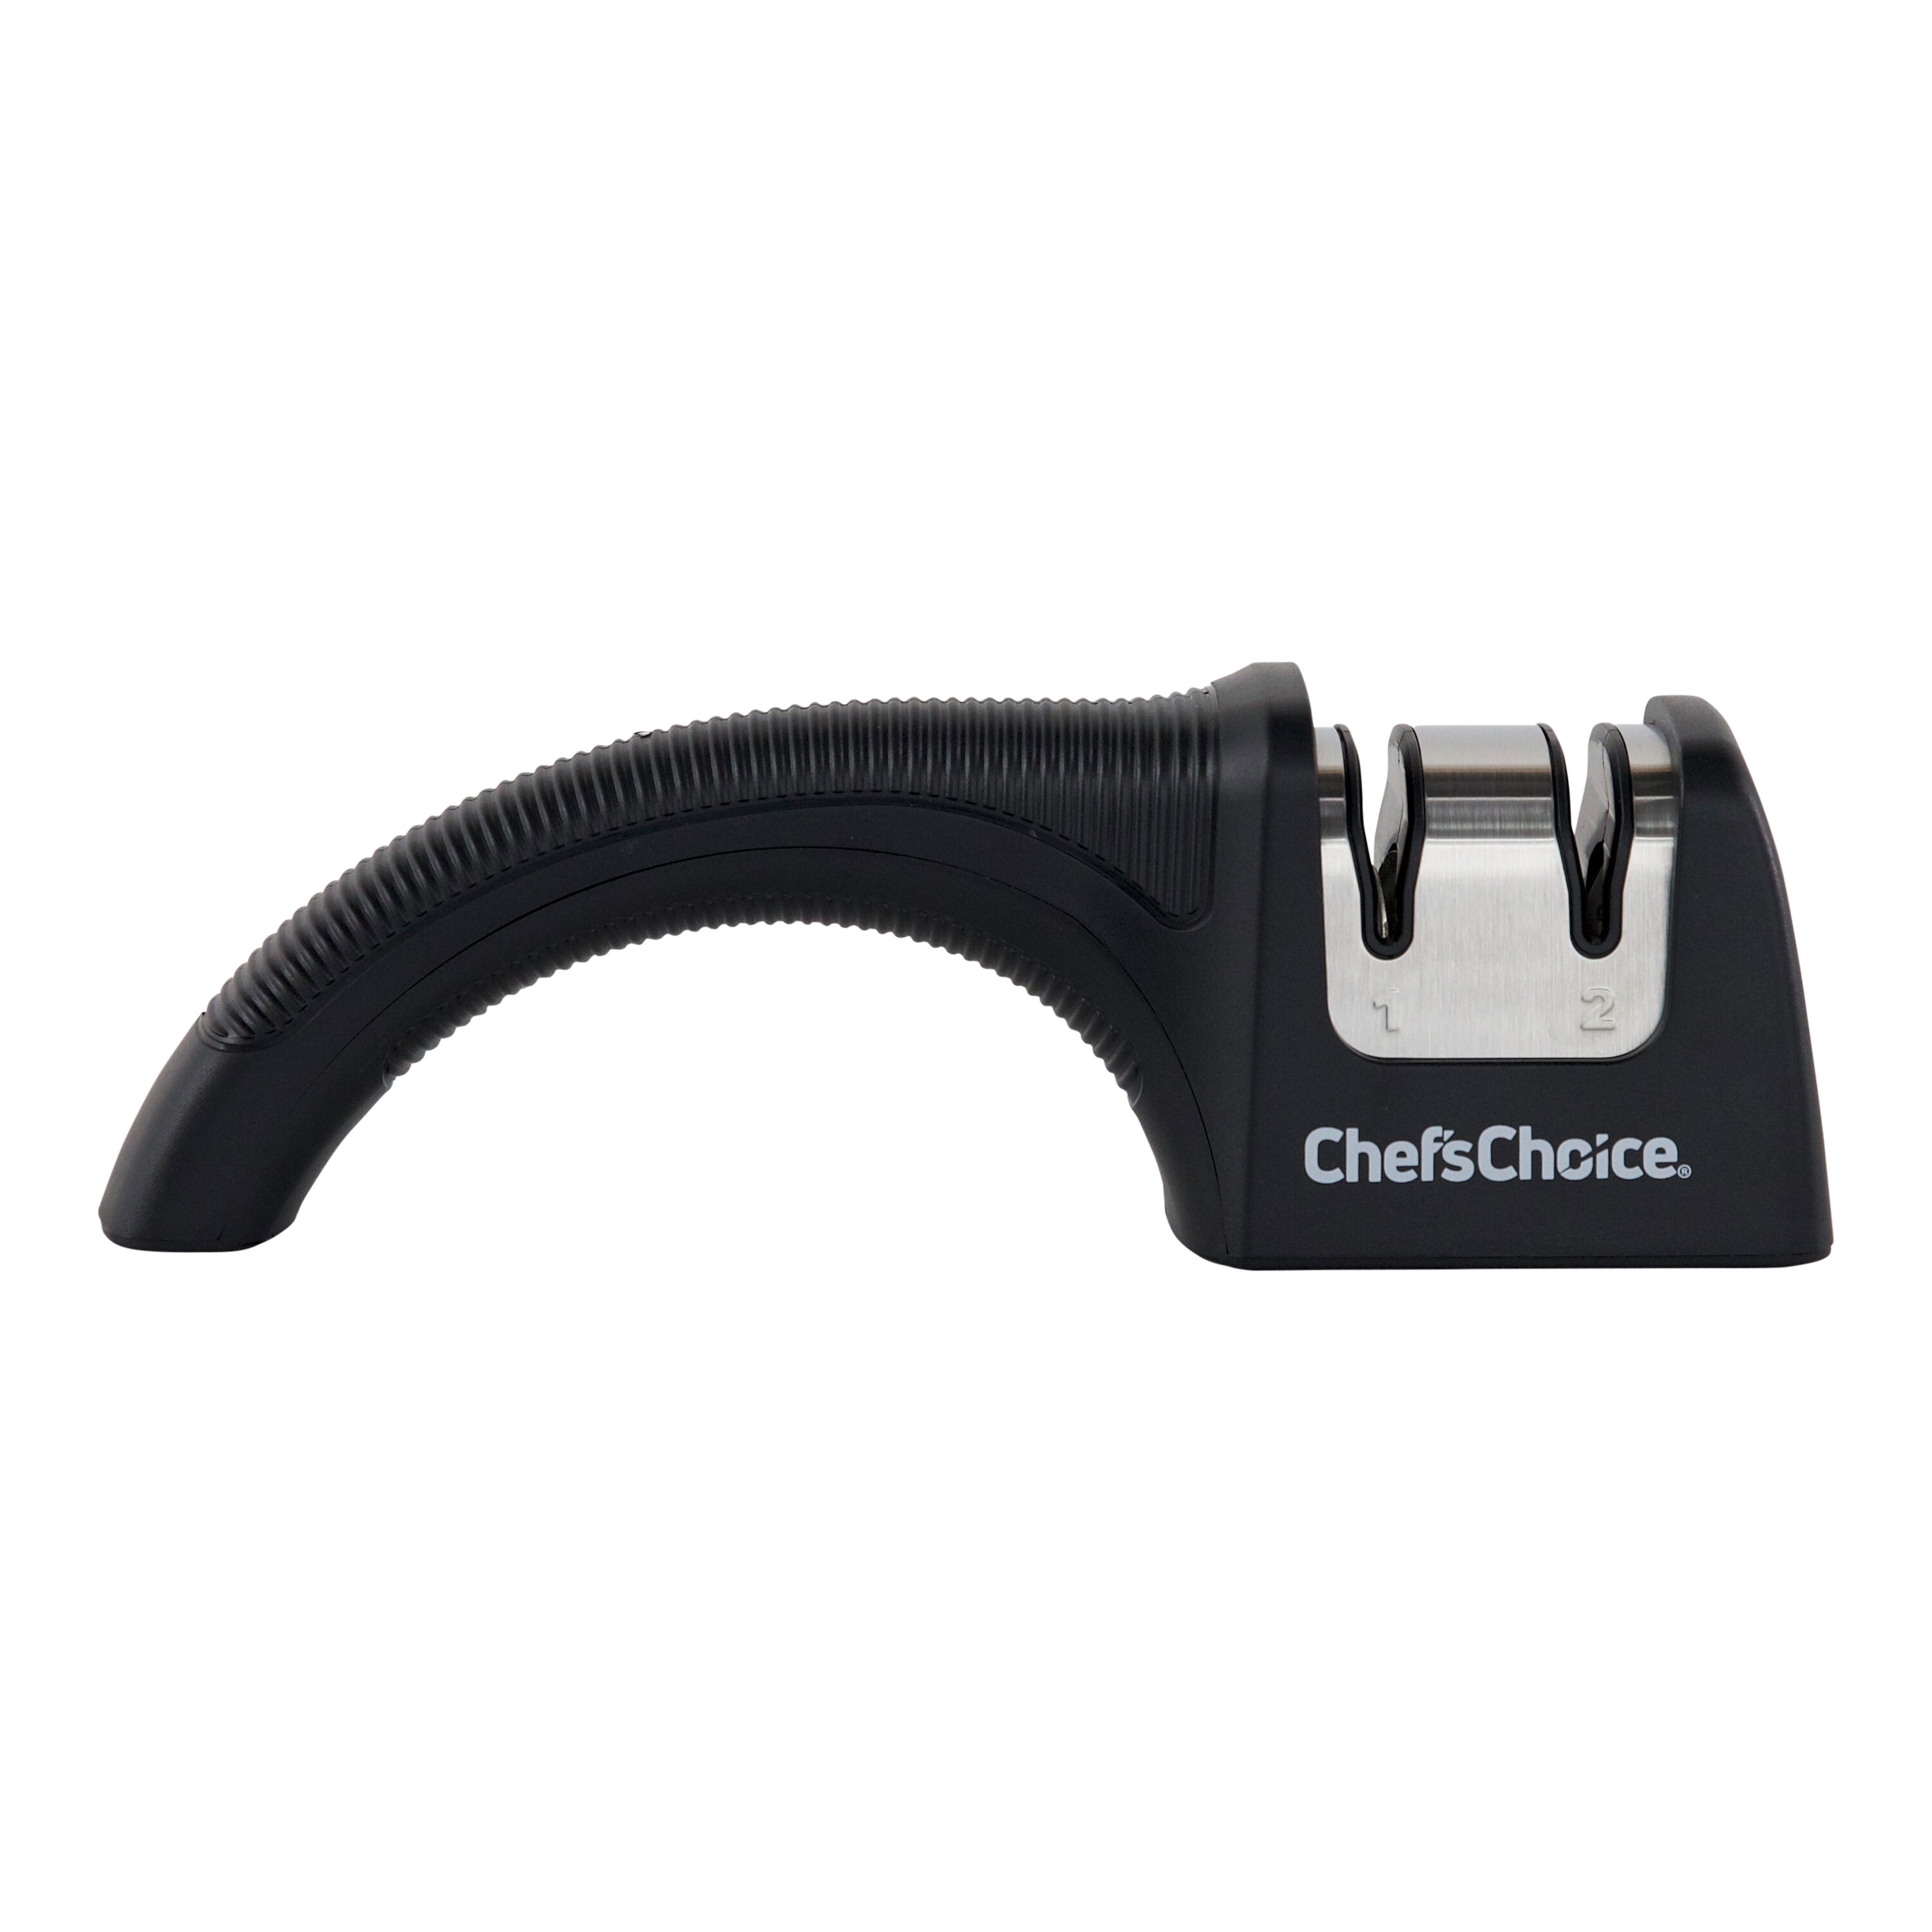 Chefs Choice 0130501 Professional Sharpening Station in Black